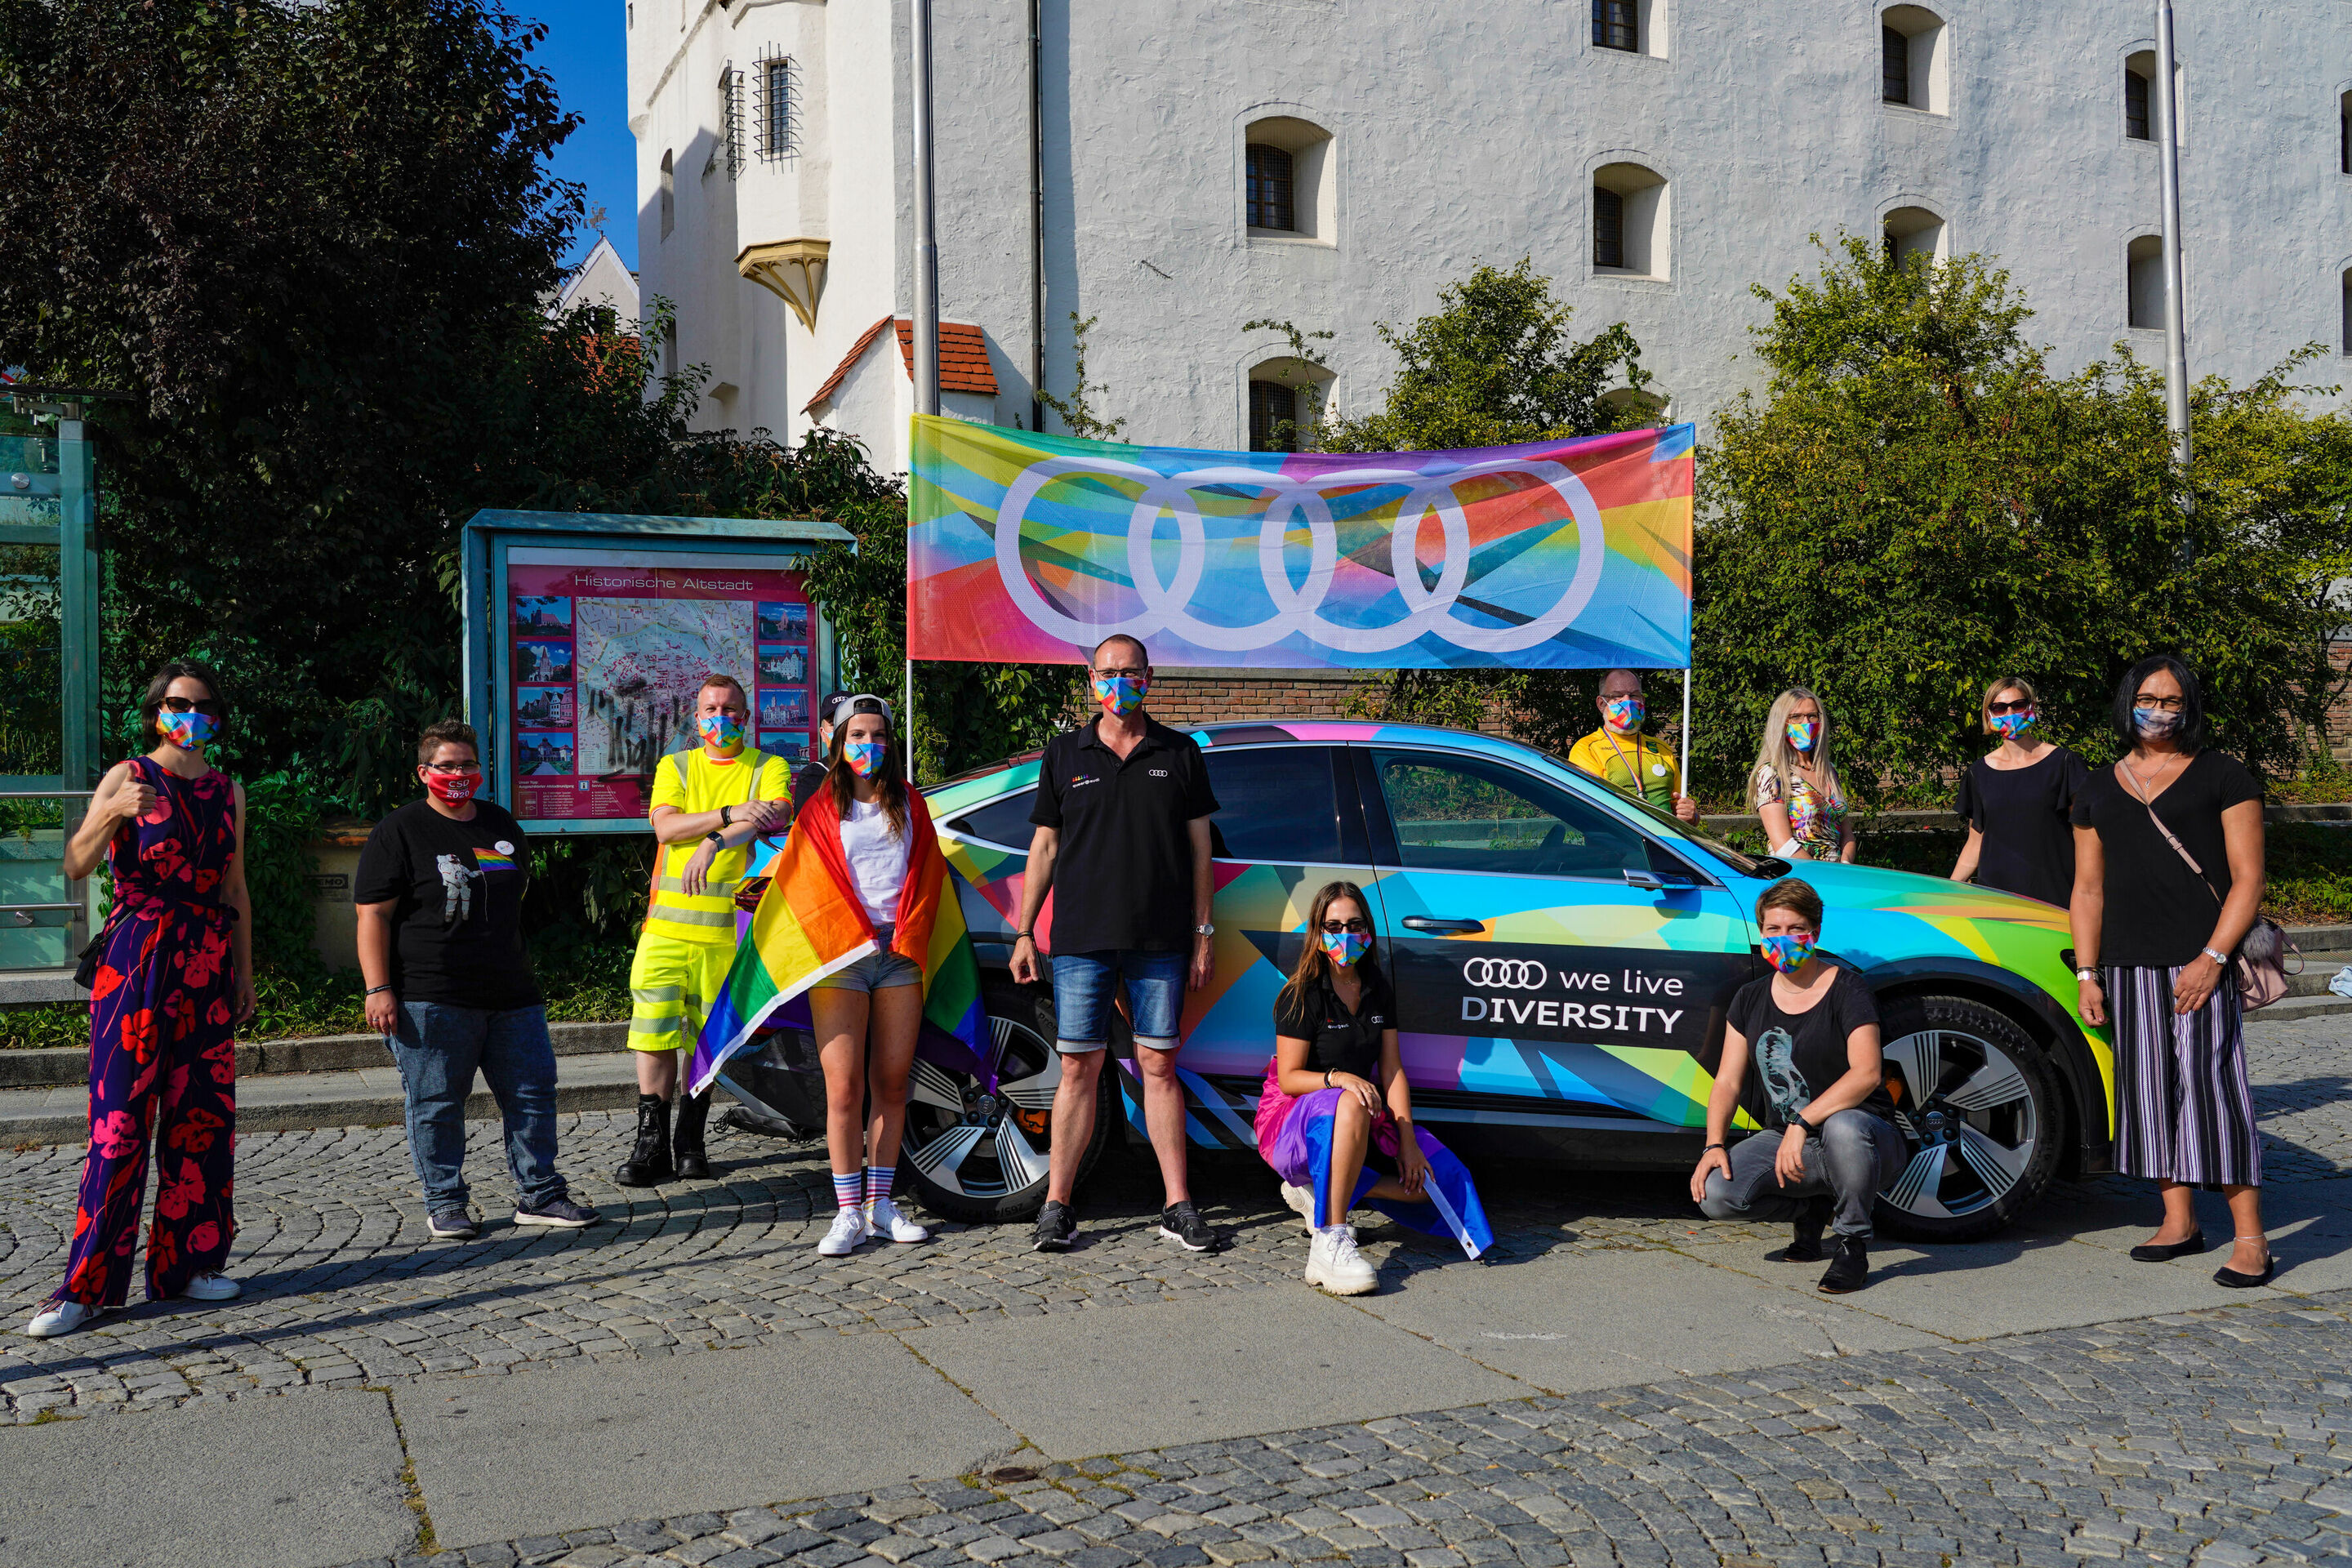 Audi shows its commitment to diversity at Christopher Street Day in Ingolstadt